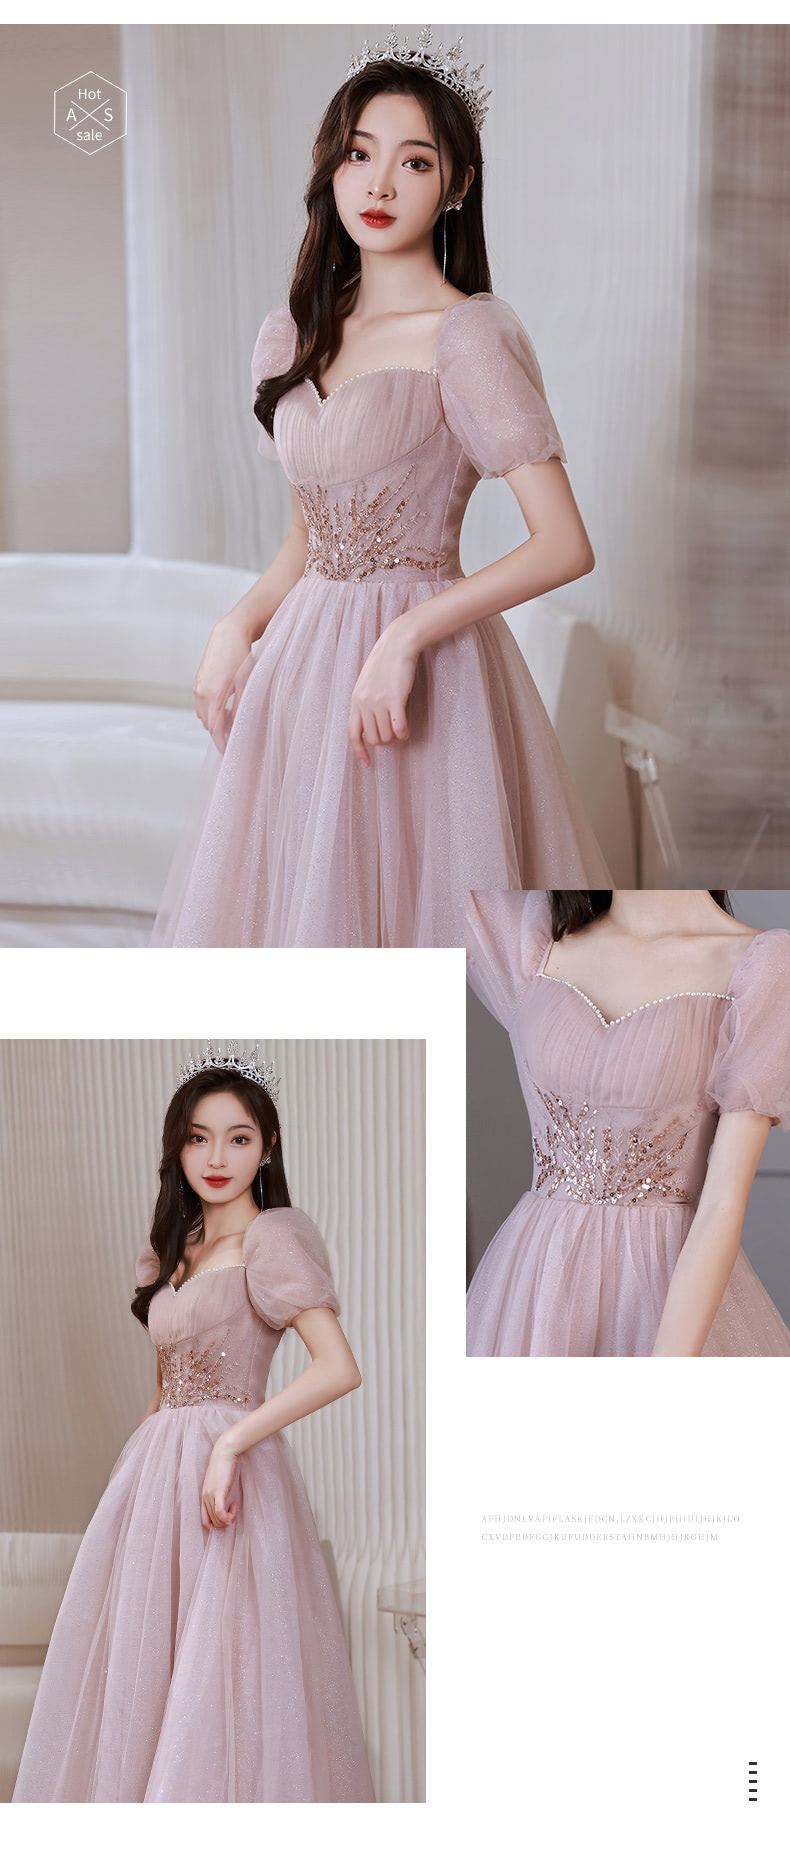 A-Line-Simple-Pink-Tulle-Graduation-Homecoming-Prom-Party-Dress11.jpg